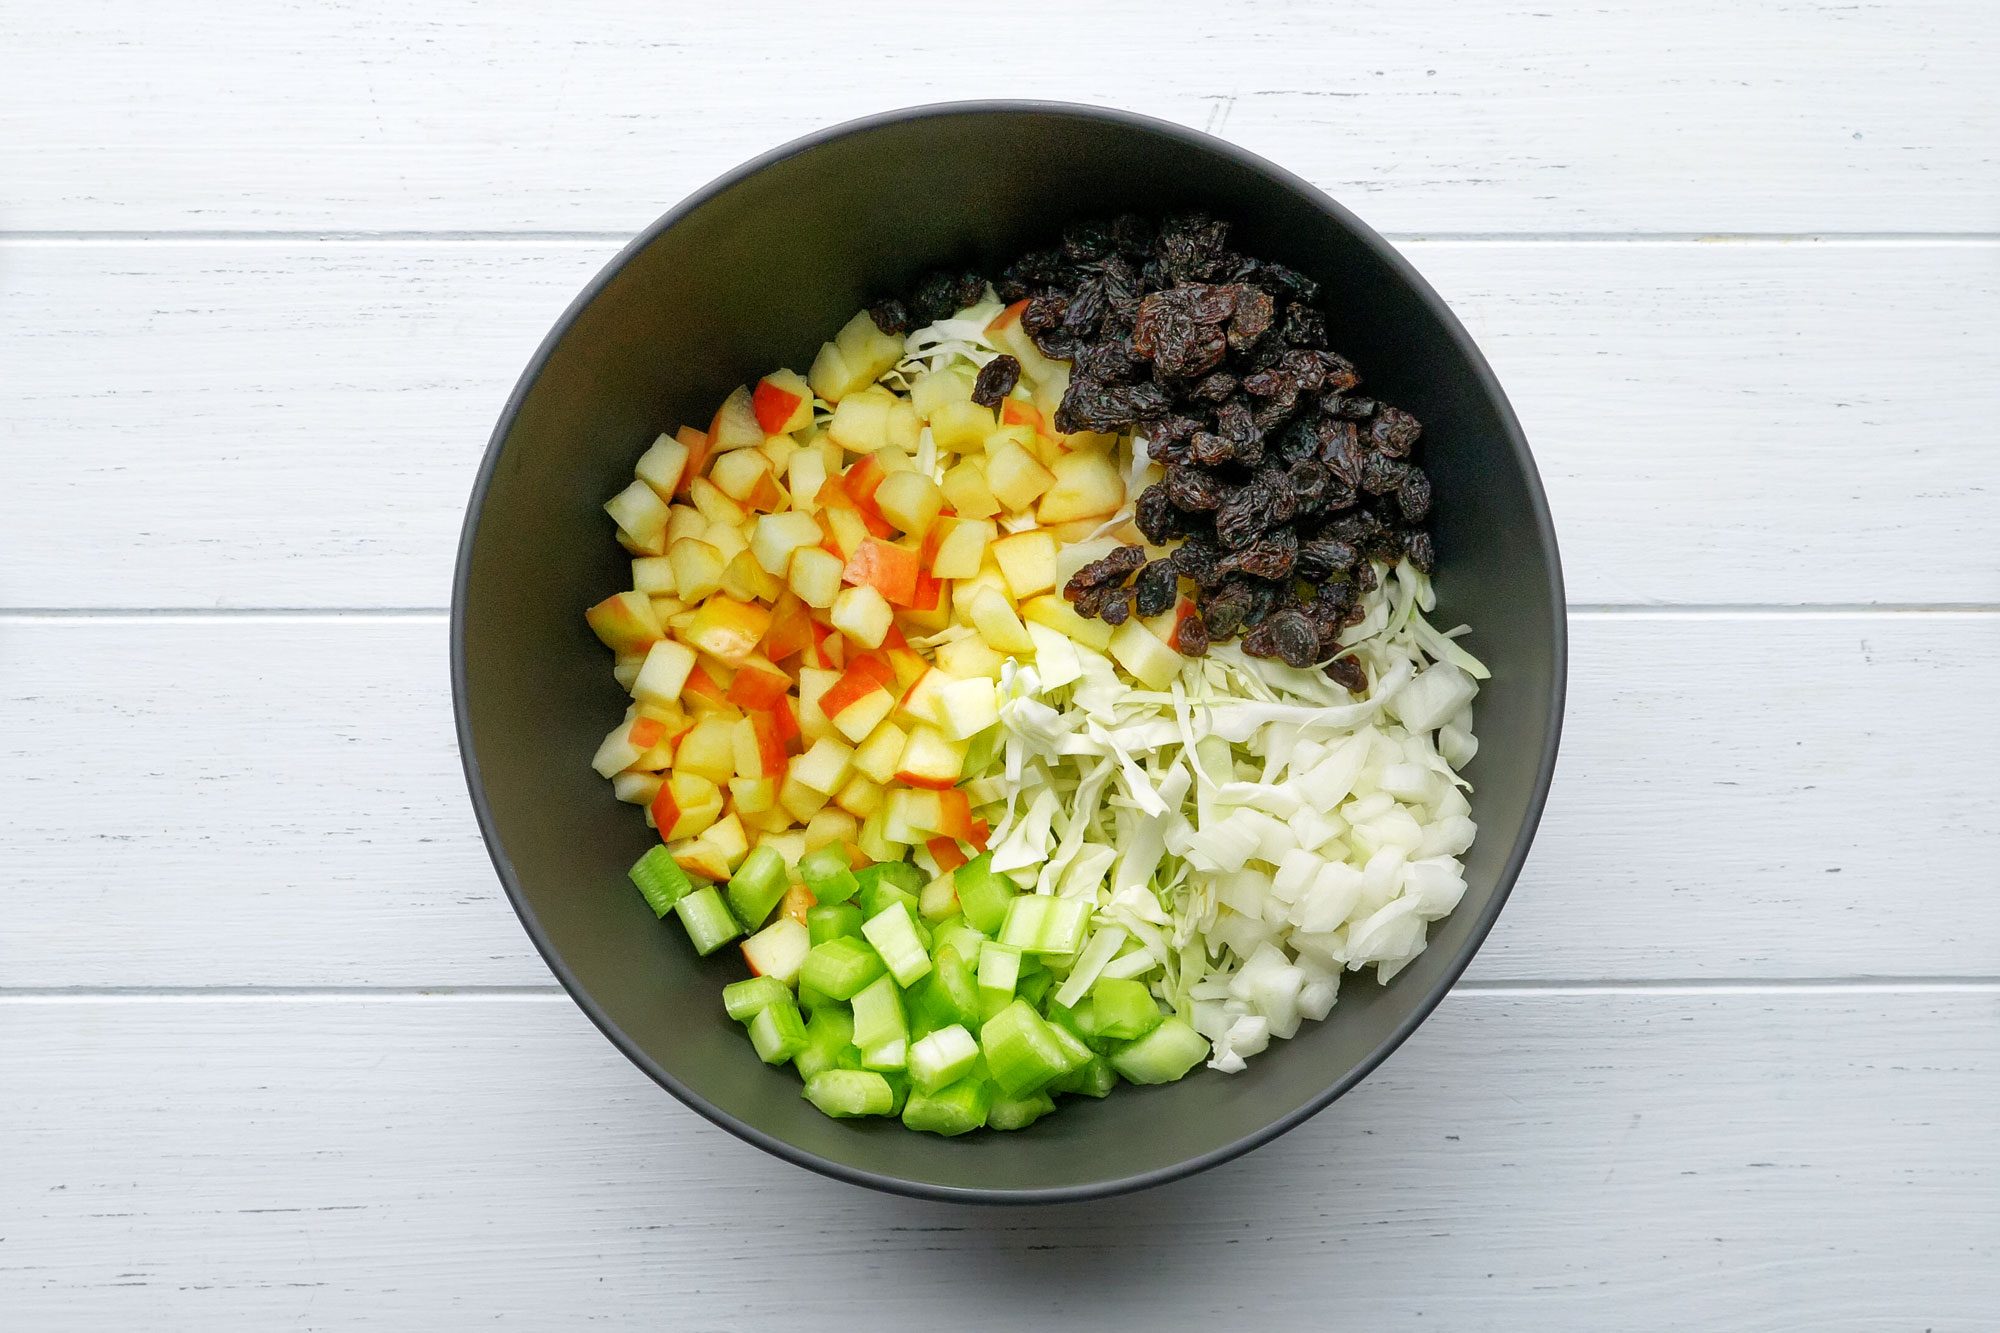 shredded cabbage, chopped apples, celery, raisins and onion in a large bowl on painted wooden surface